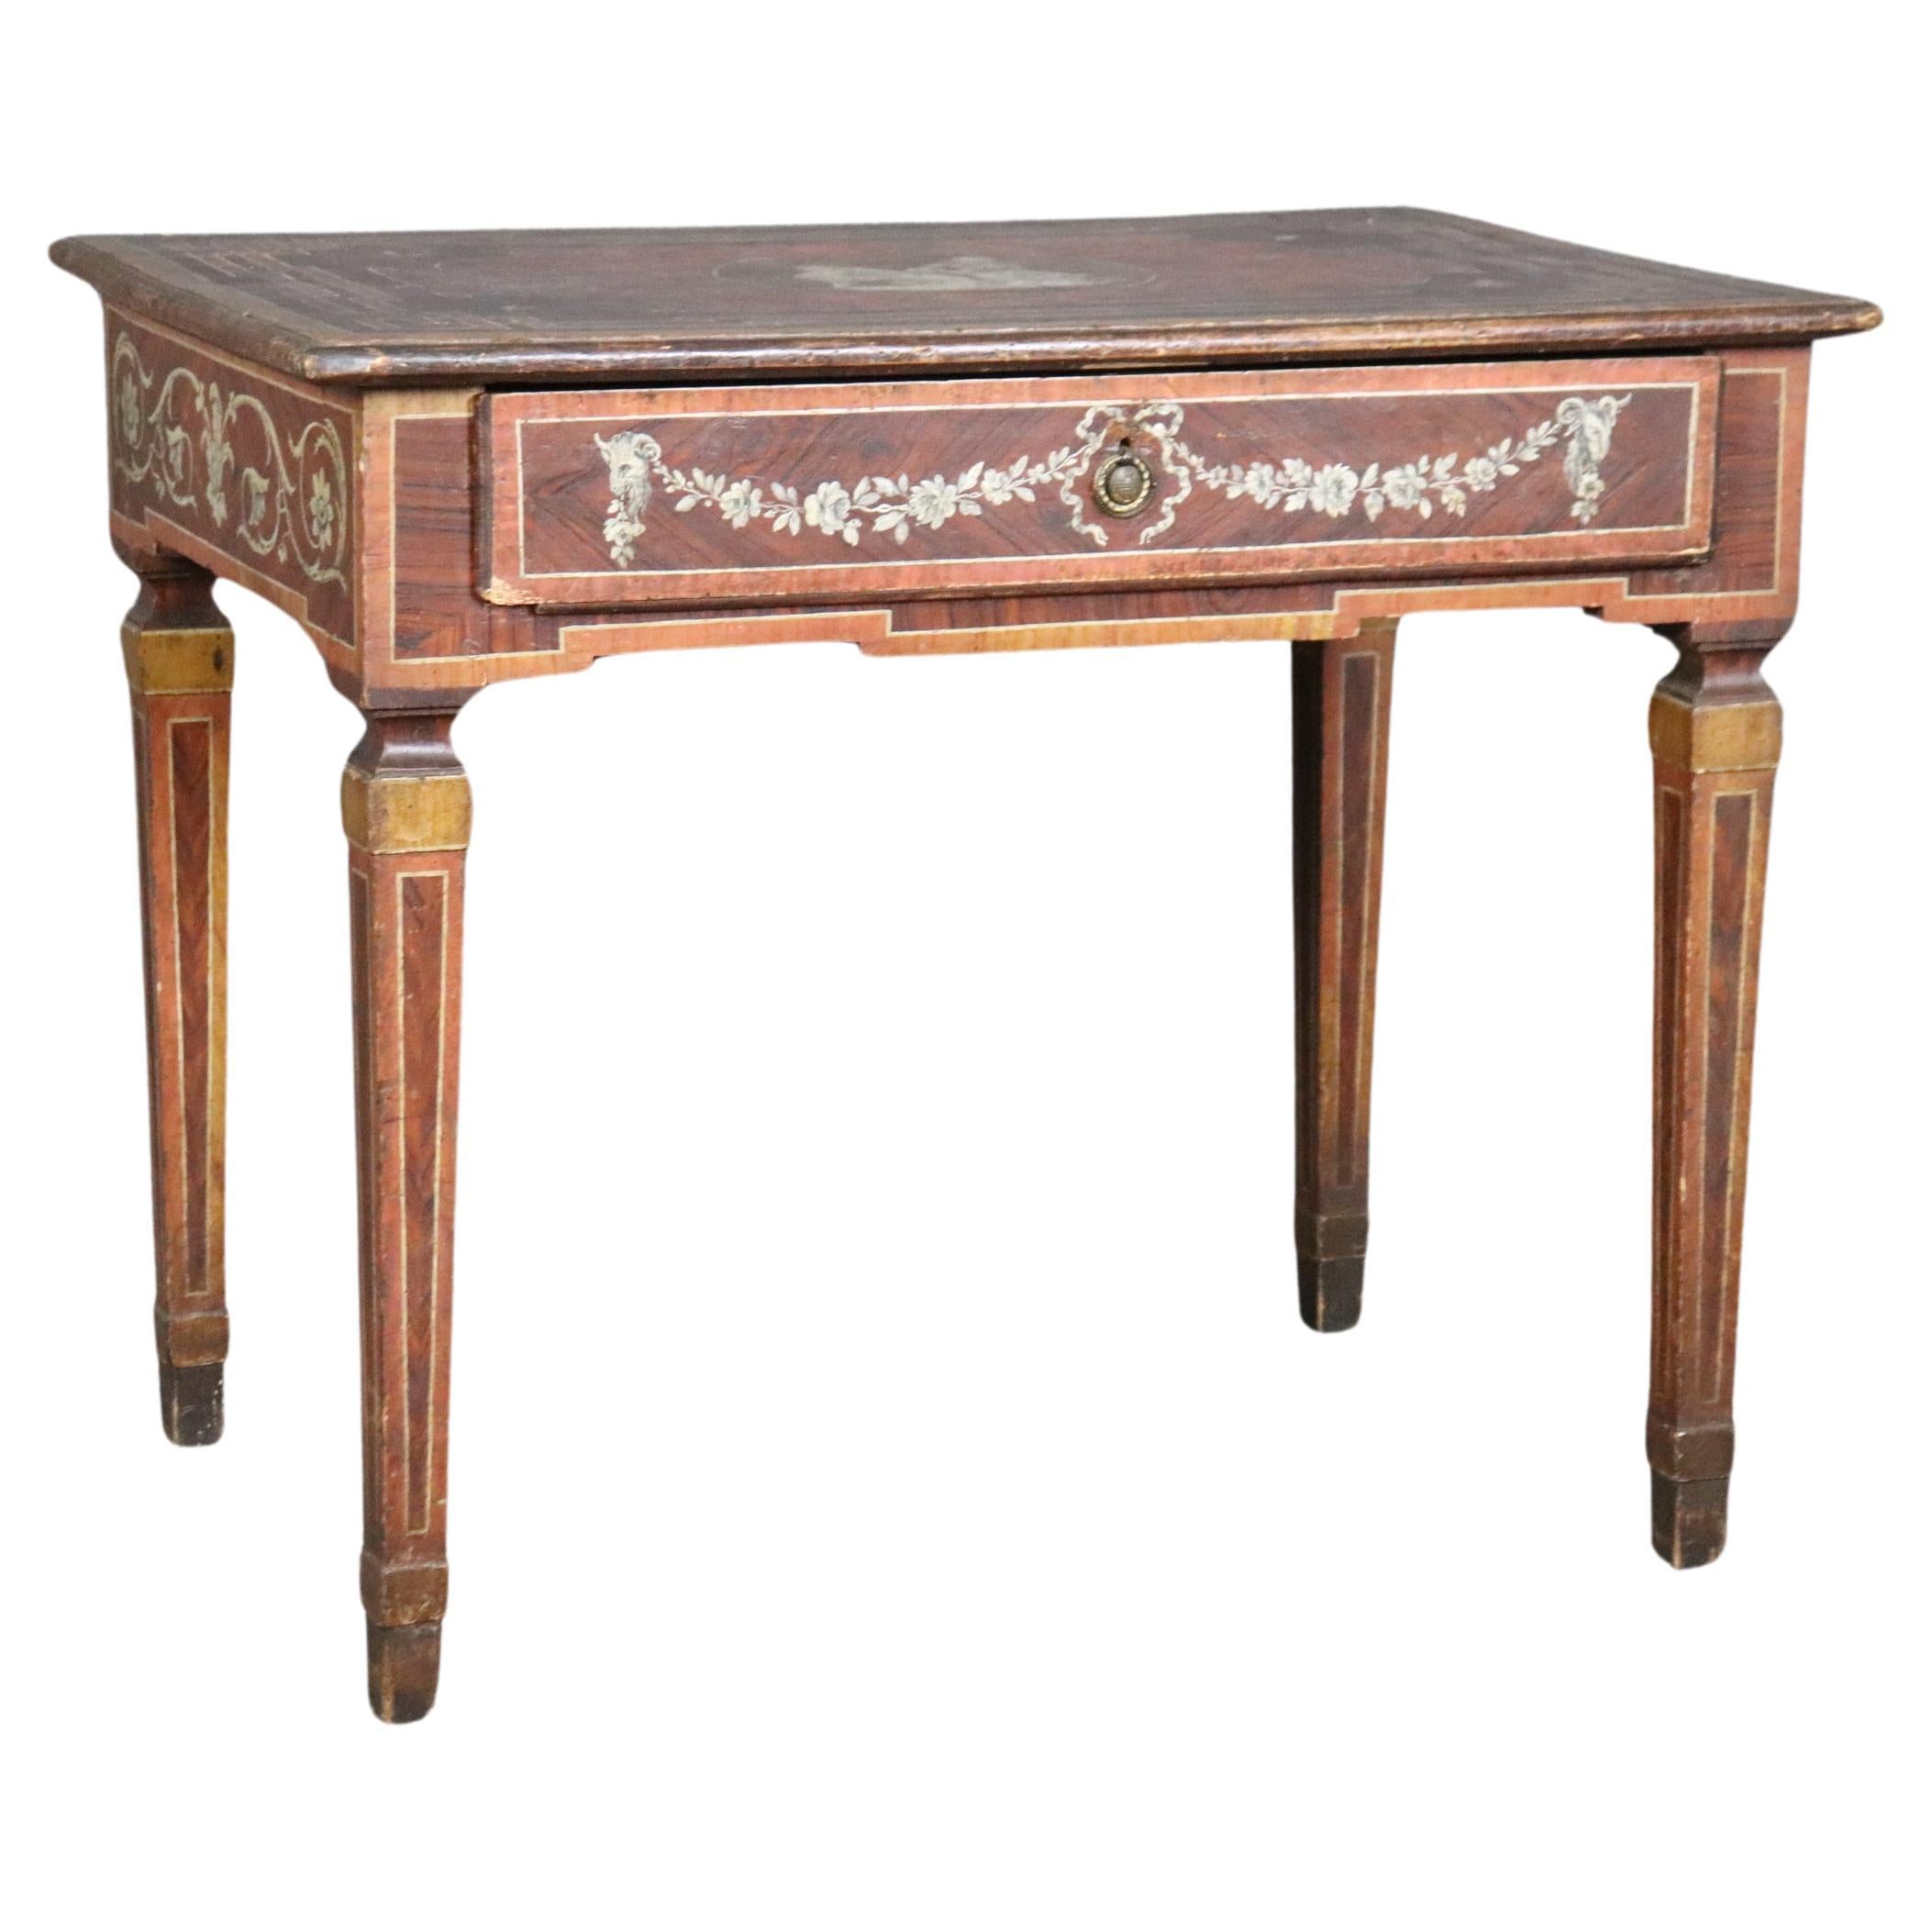 18th century Italian Paint Decorated Writing Desk with Drawer Circa 1760s For Sale